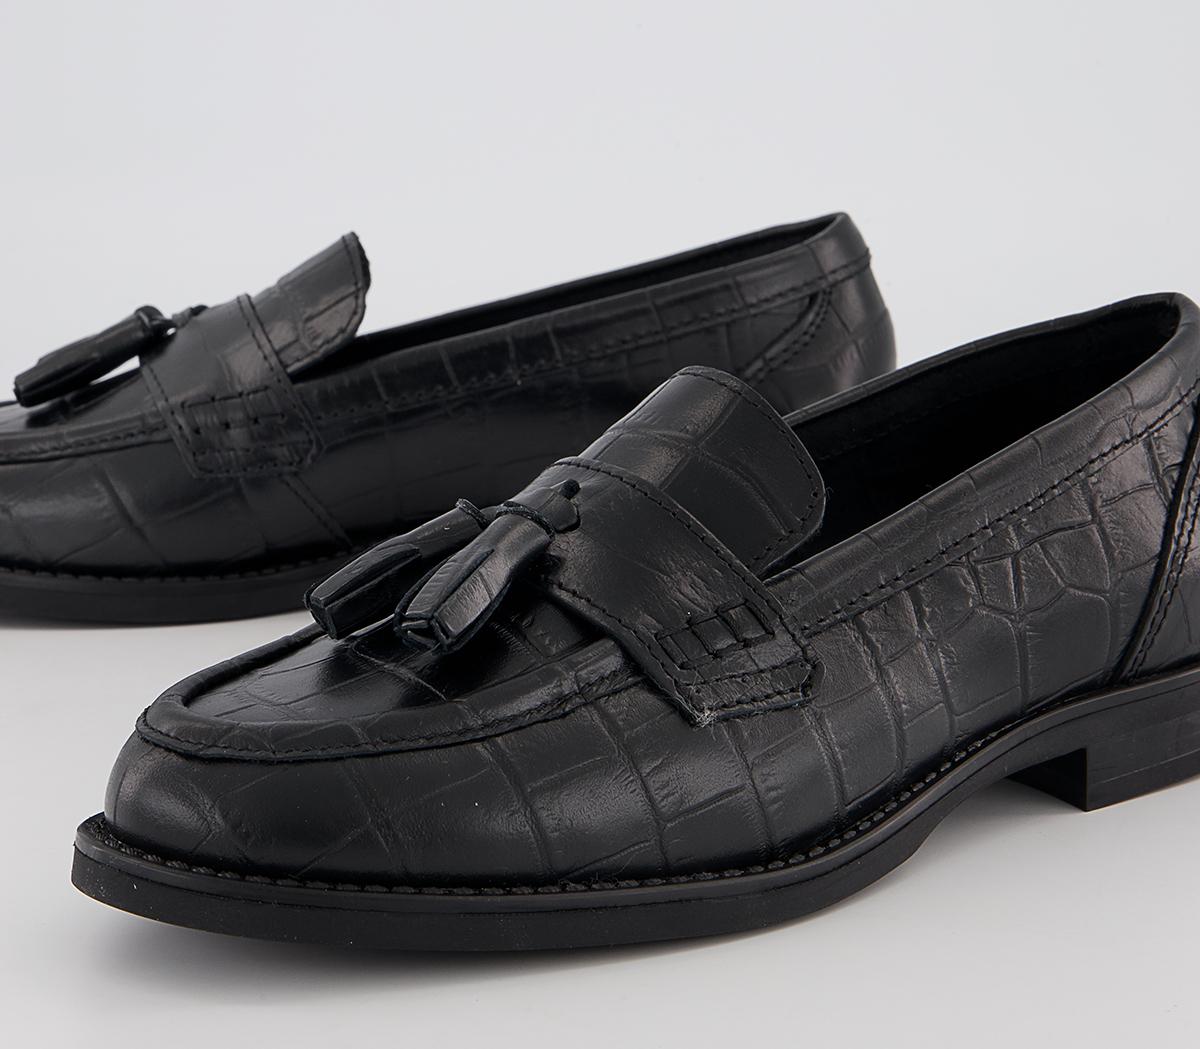 OFFICE Foundation Tassel Loafers Black Croc Leather - OFFICE Girl